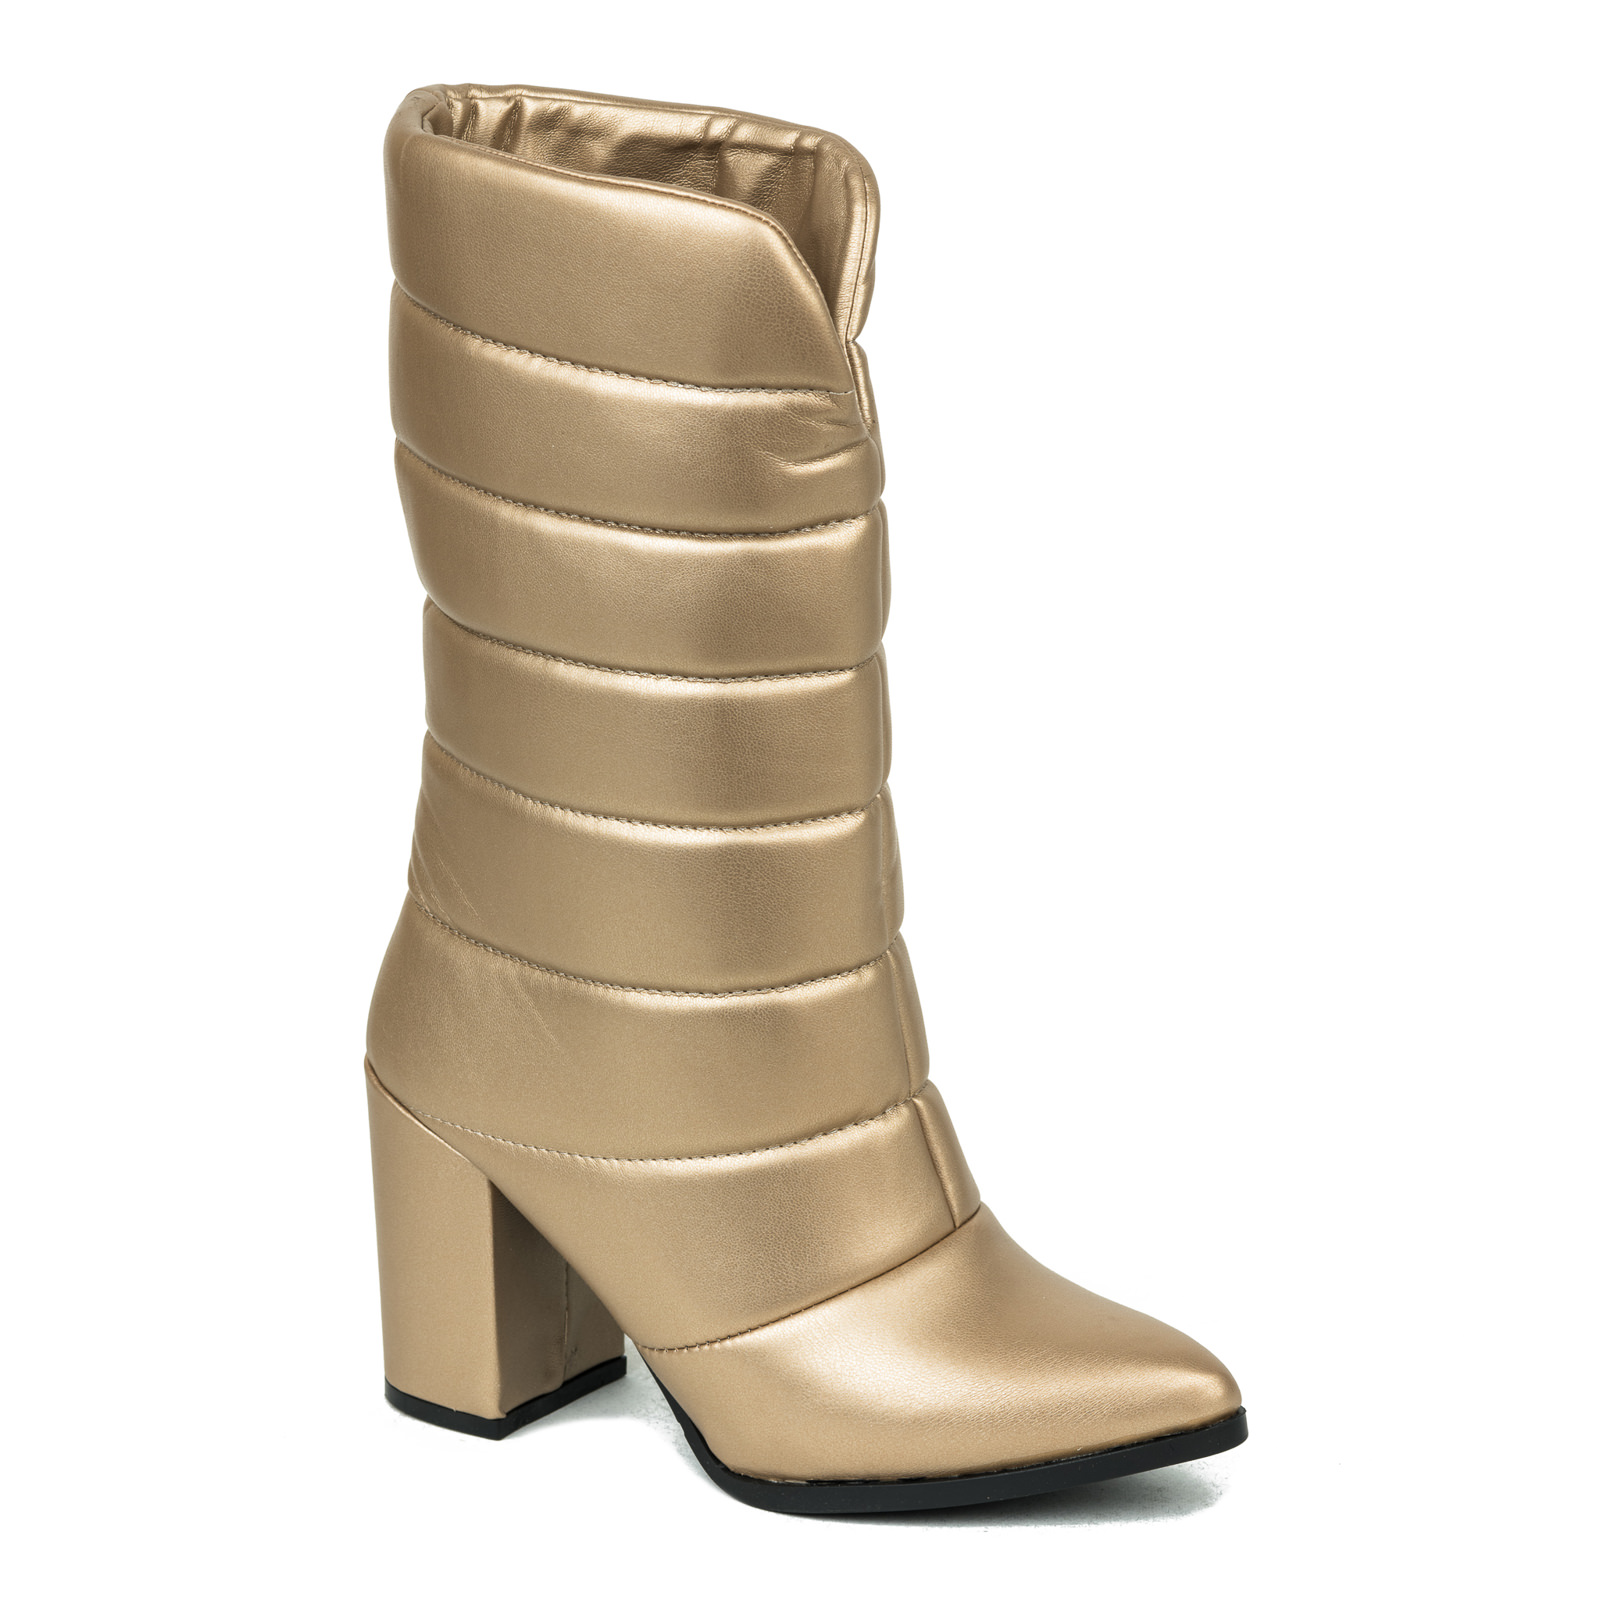 Women ankle boots B139 - GOLD